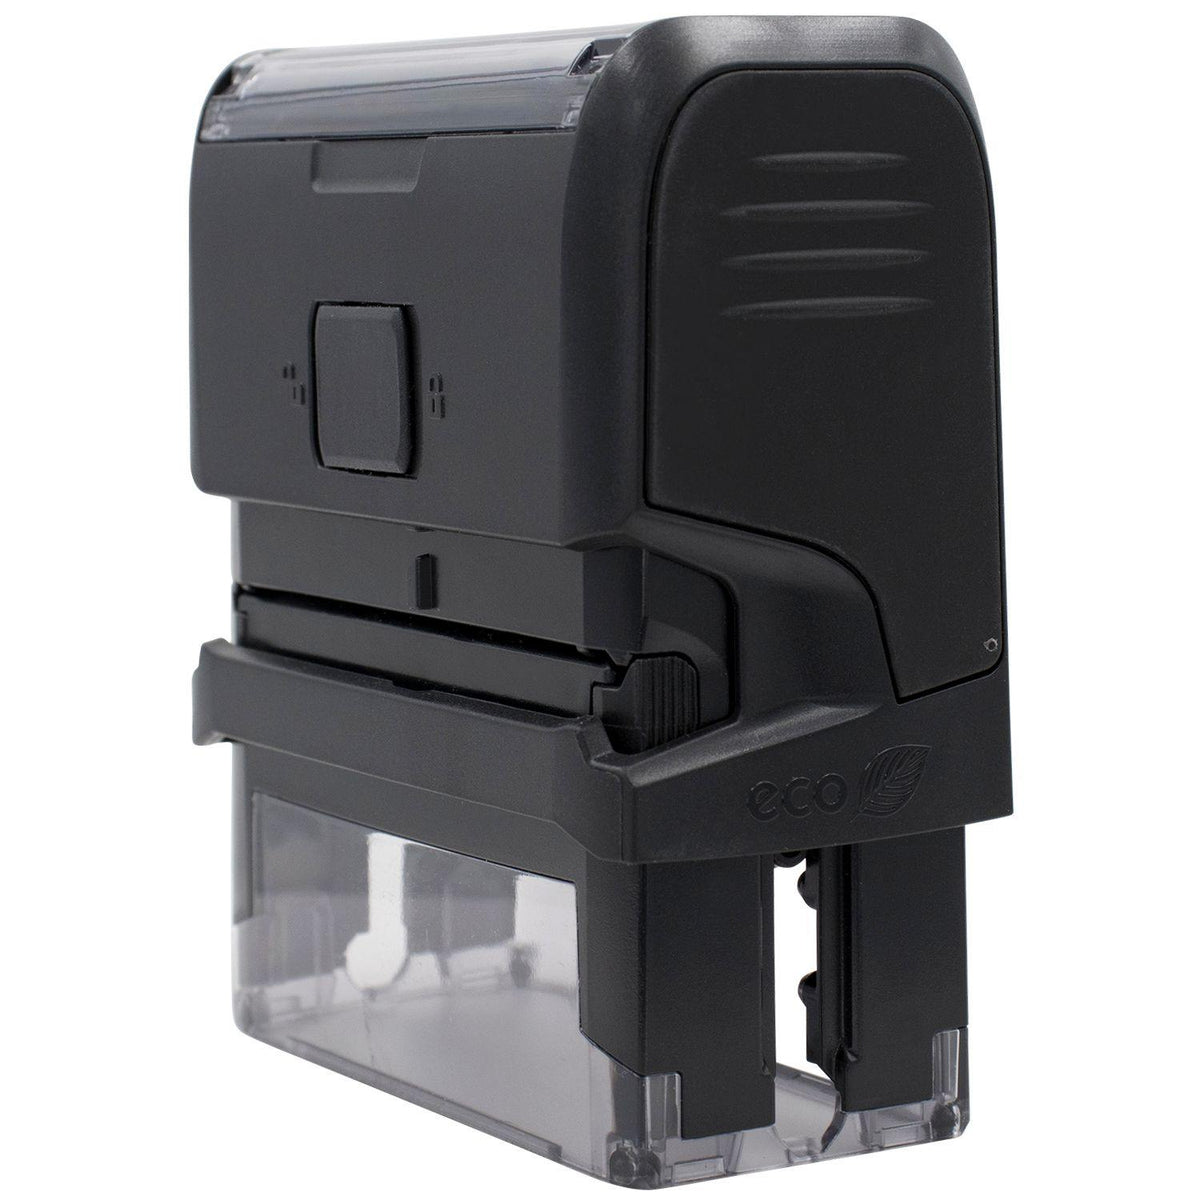 Side View of Large Self Inking Cod Stamp at an Angle